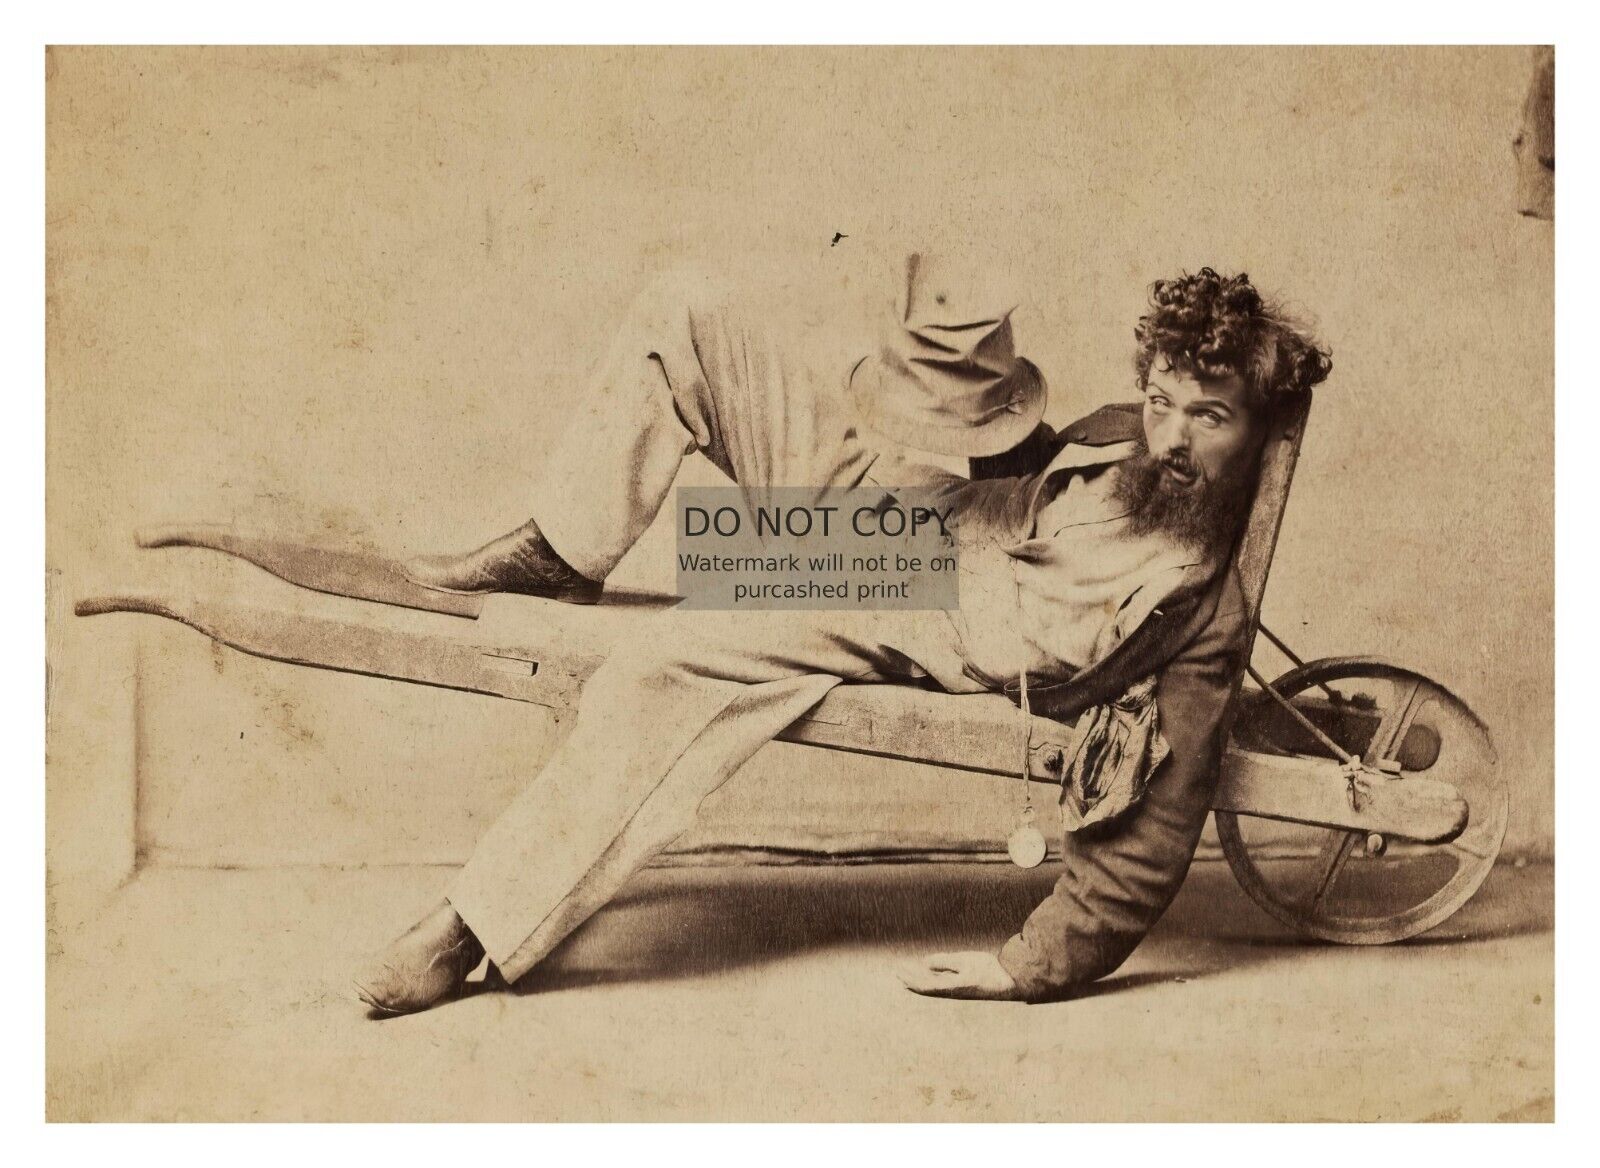 DRUNK MAN LAYING PASSED OUT IN WHEELBARROW VINTAGE 1800s 5X7 PHOTO